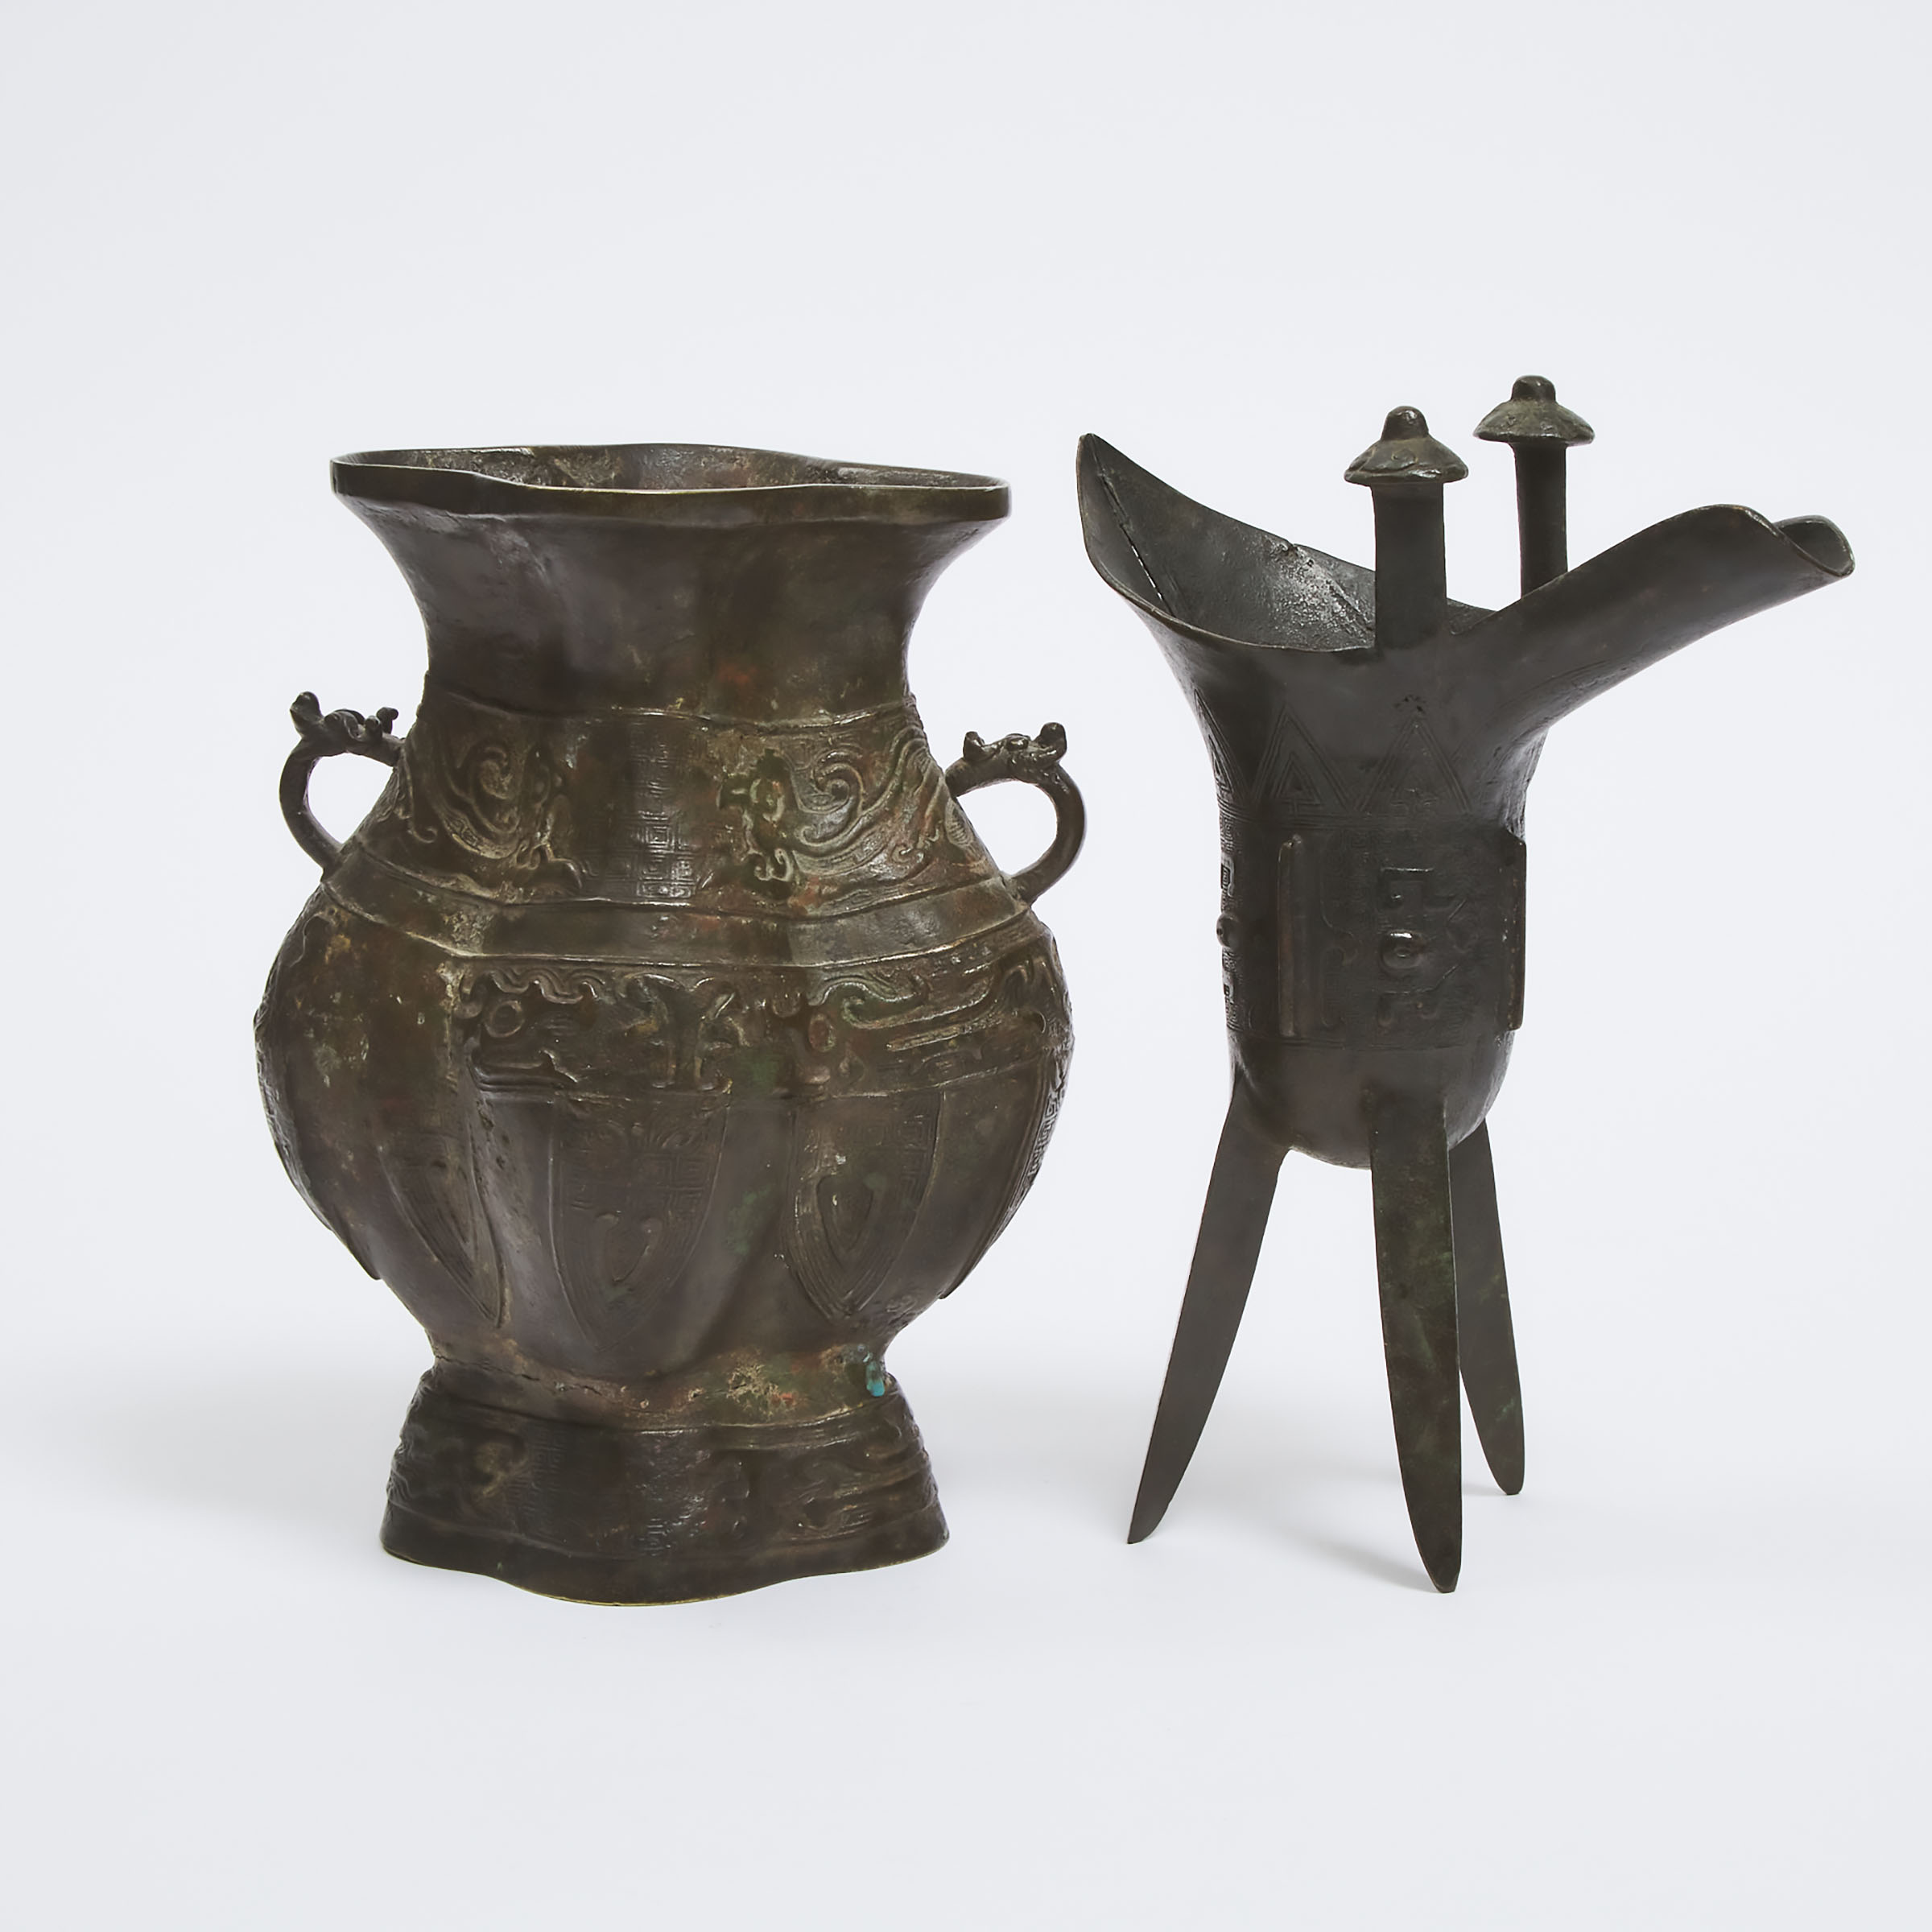 Two Bronze Archaic-Style Vessels, Ming/Qing Dynasty